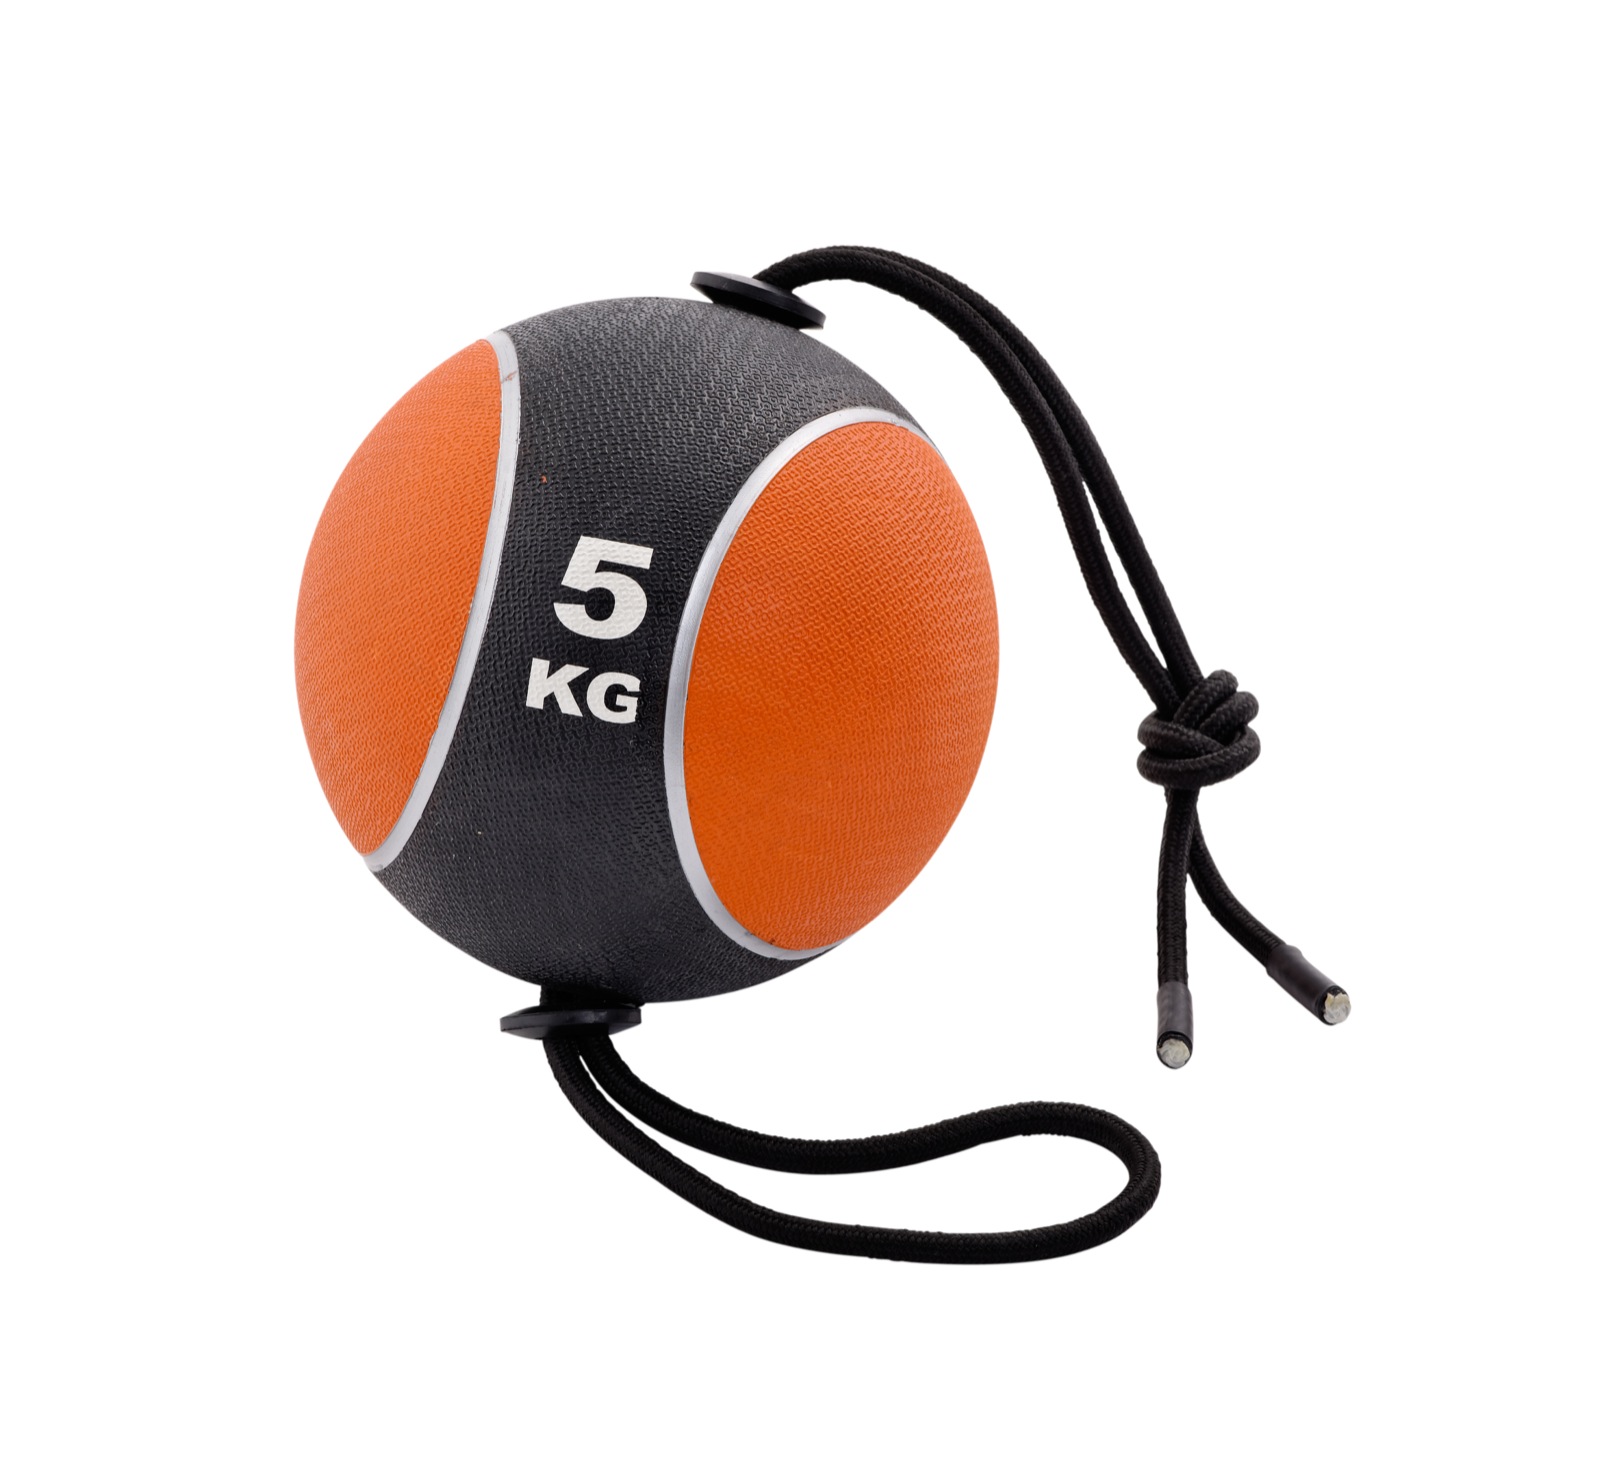 5 kg Medicine Ball with Rope by York - Chandler Sports